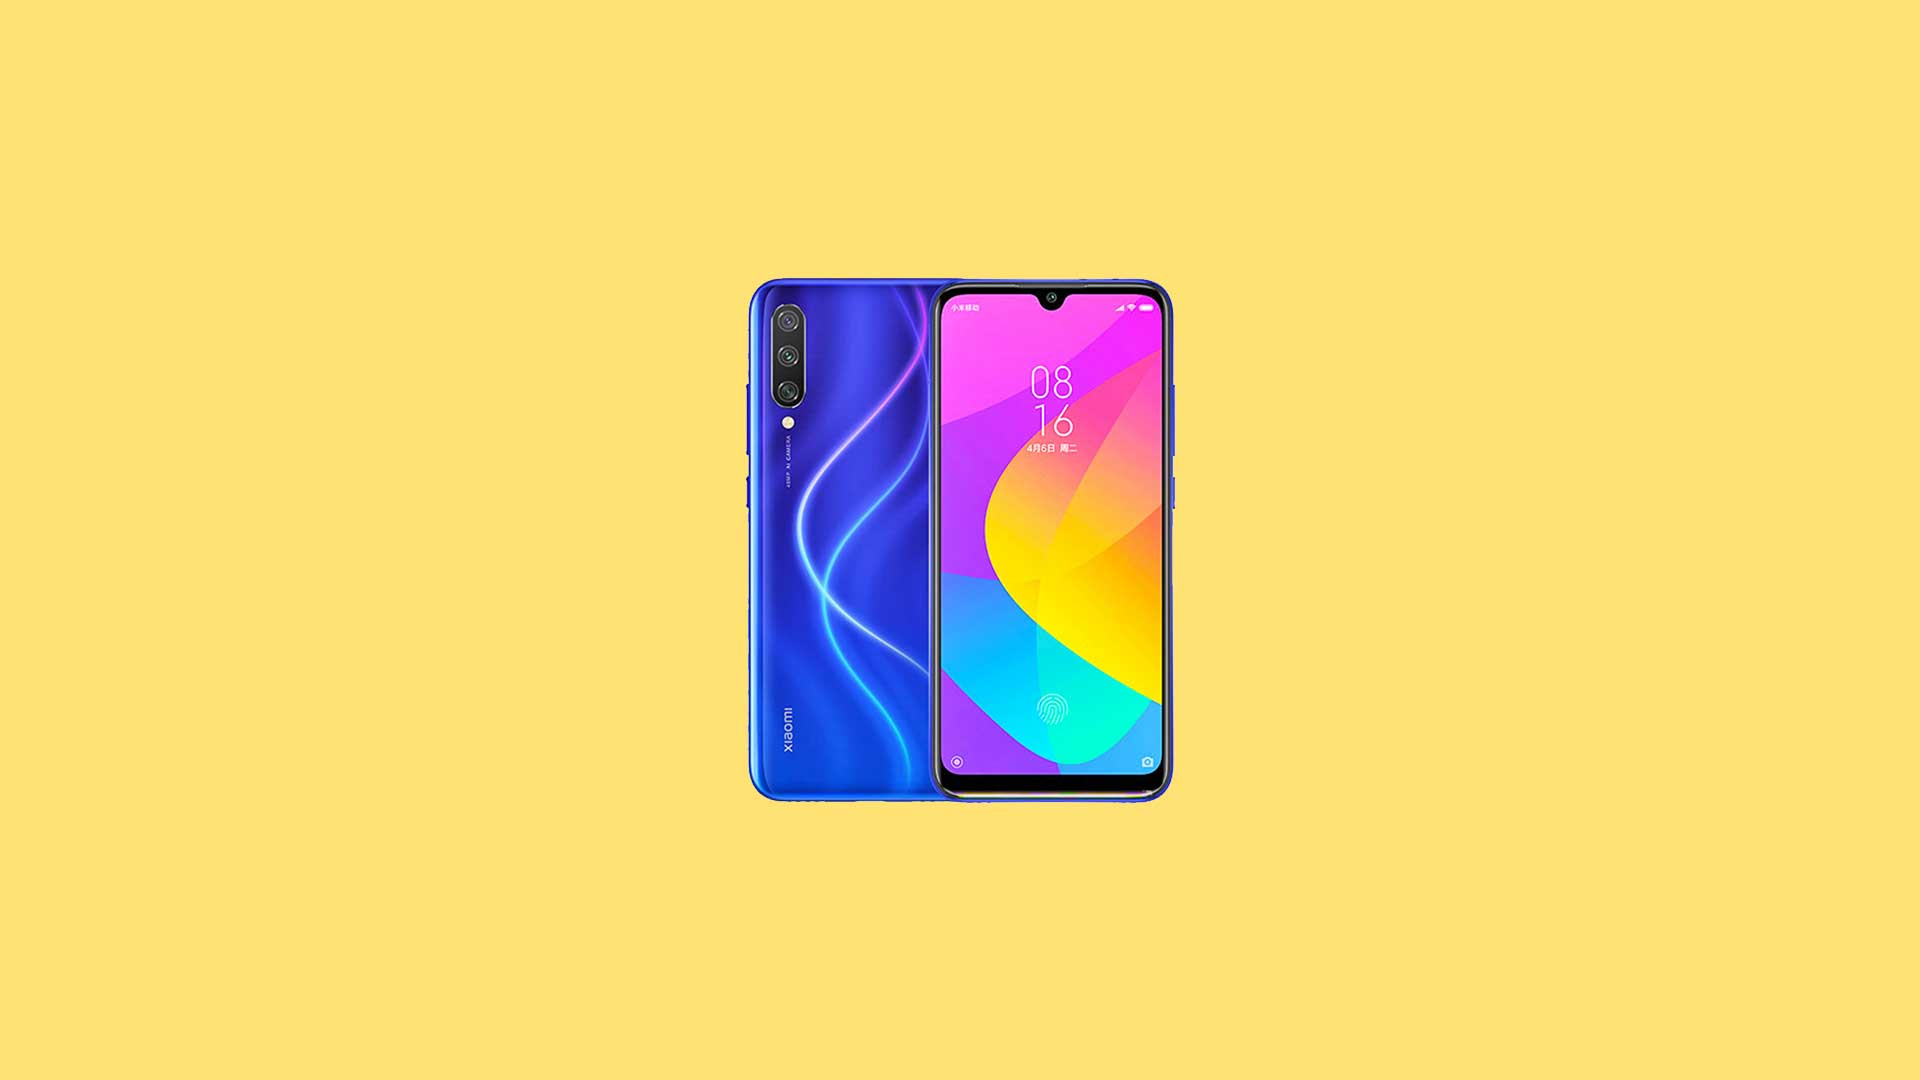 How to Install Official TWRP Recovery on Xiaomi Mi 9 Lite / Mi CC9 and Root it